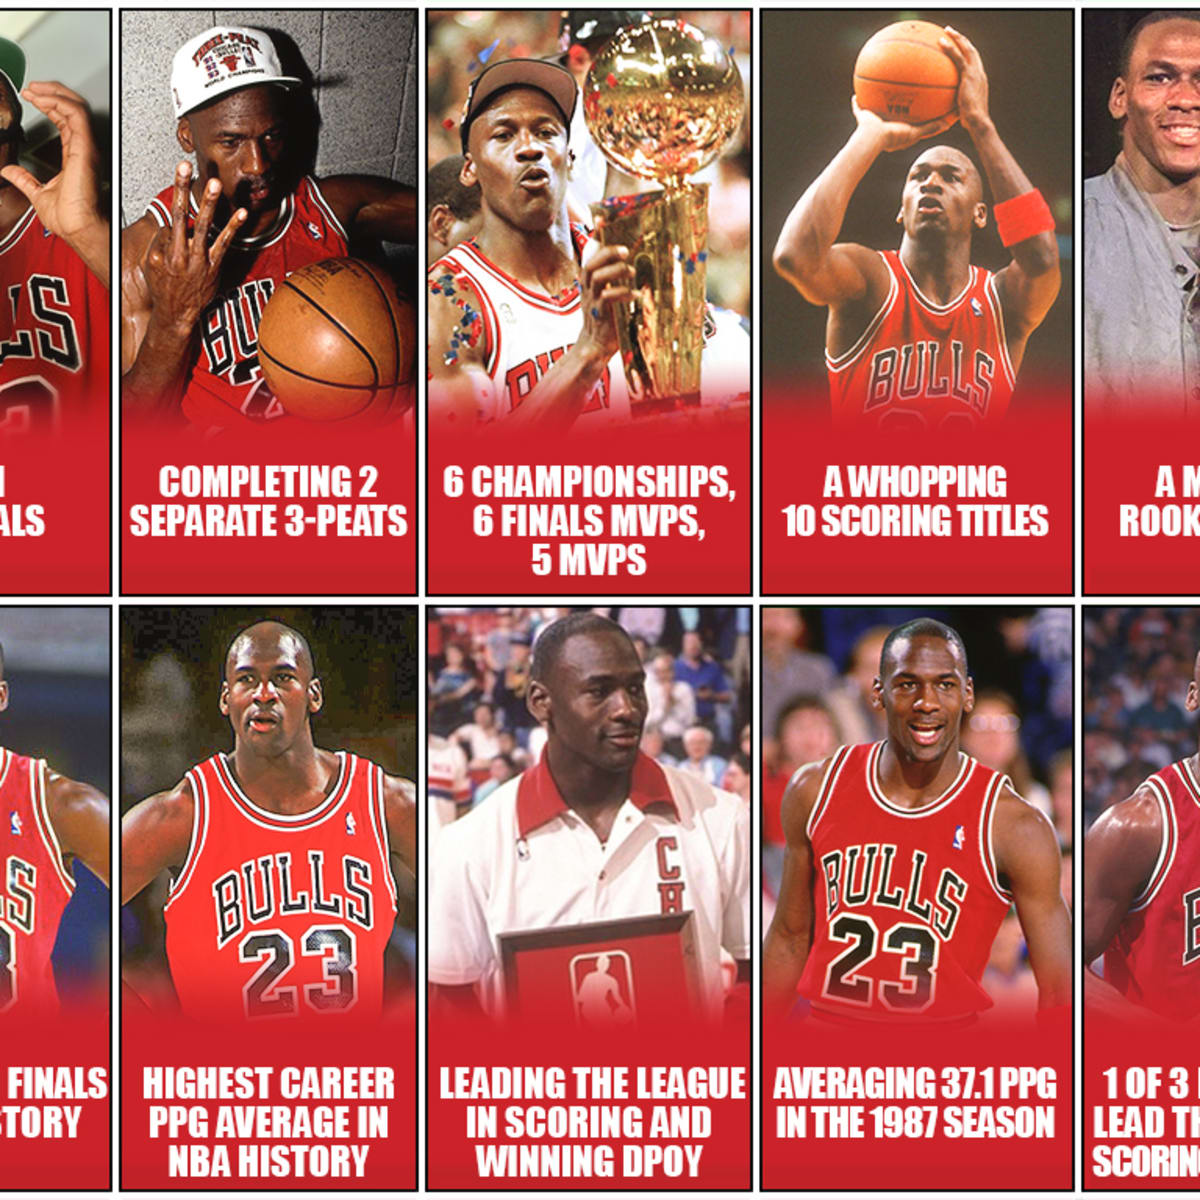 Michael Jordan: Why He's a 6-Time Finals MVP, 6-for-6 Champion and G.O.A.T., News, Scores, Highlights, Stats, and Rumors